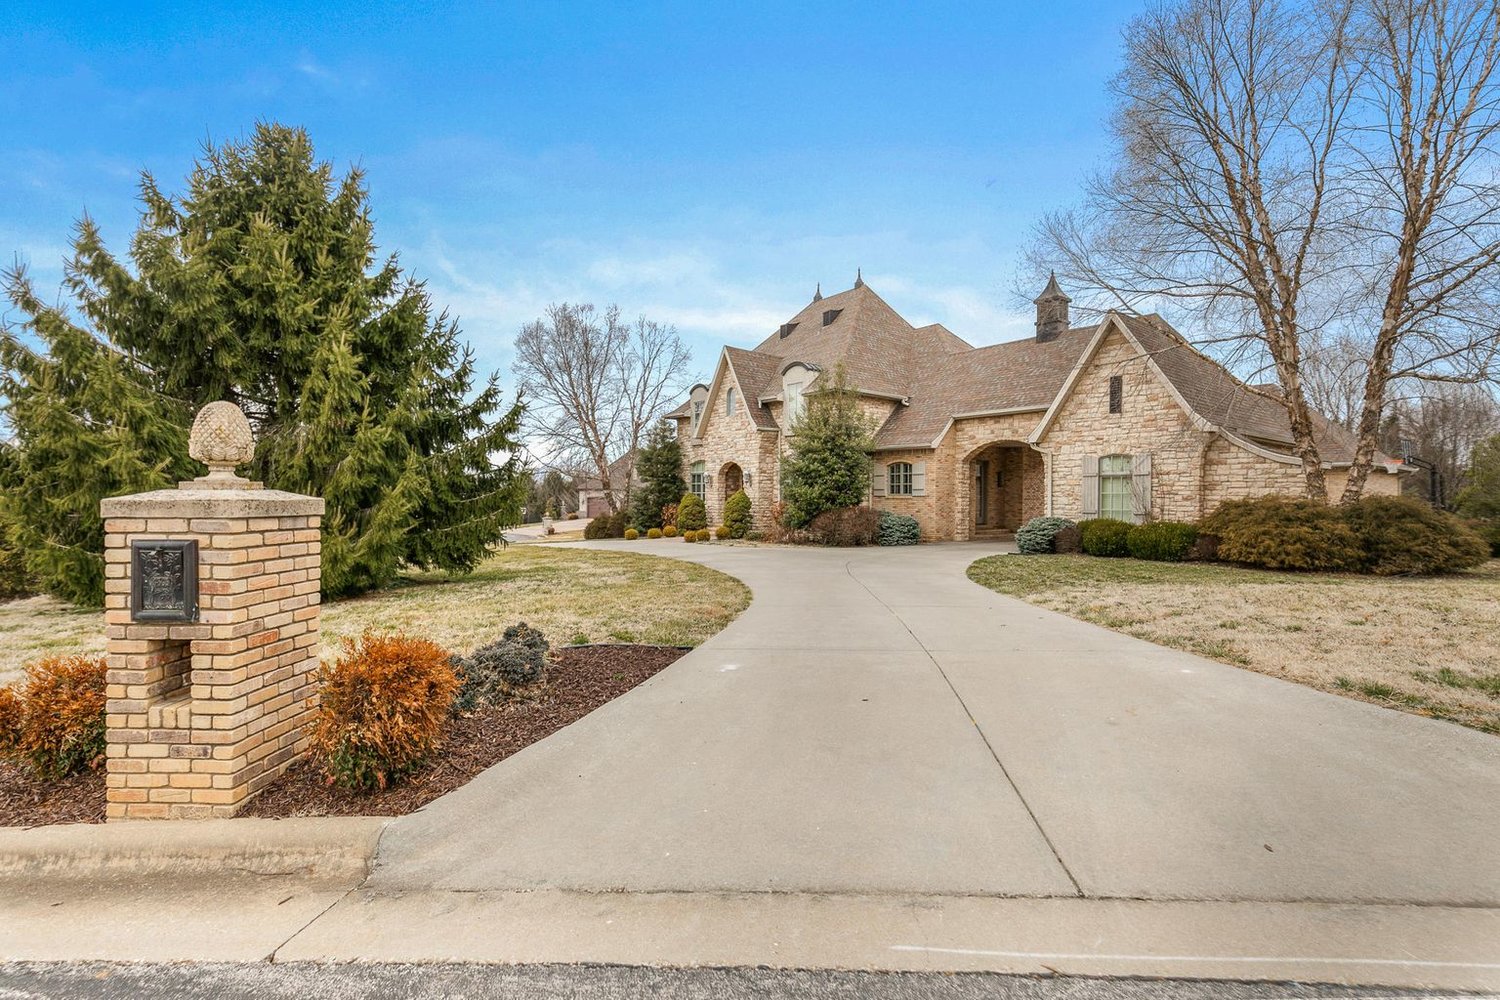 4565 E. Spruce Drive
$799,900
Bedrooms: 4
Bathrooms: 4.5
Listing firm: Keller Williams Greater Springfield